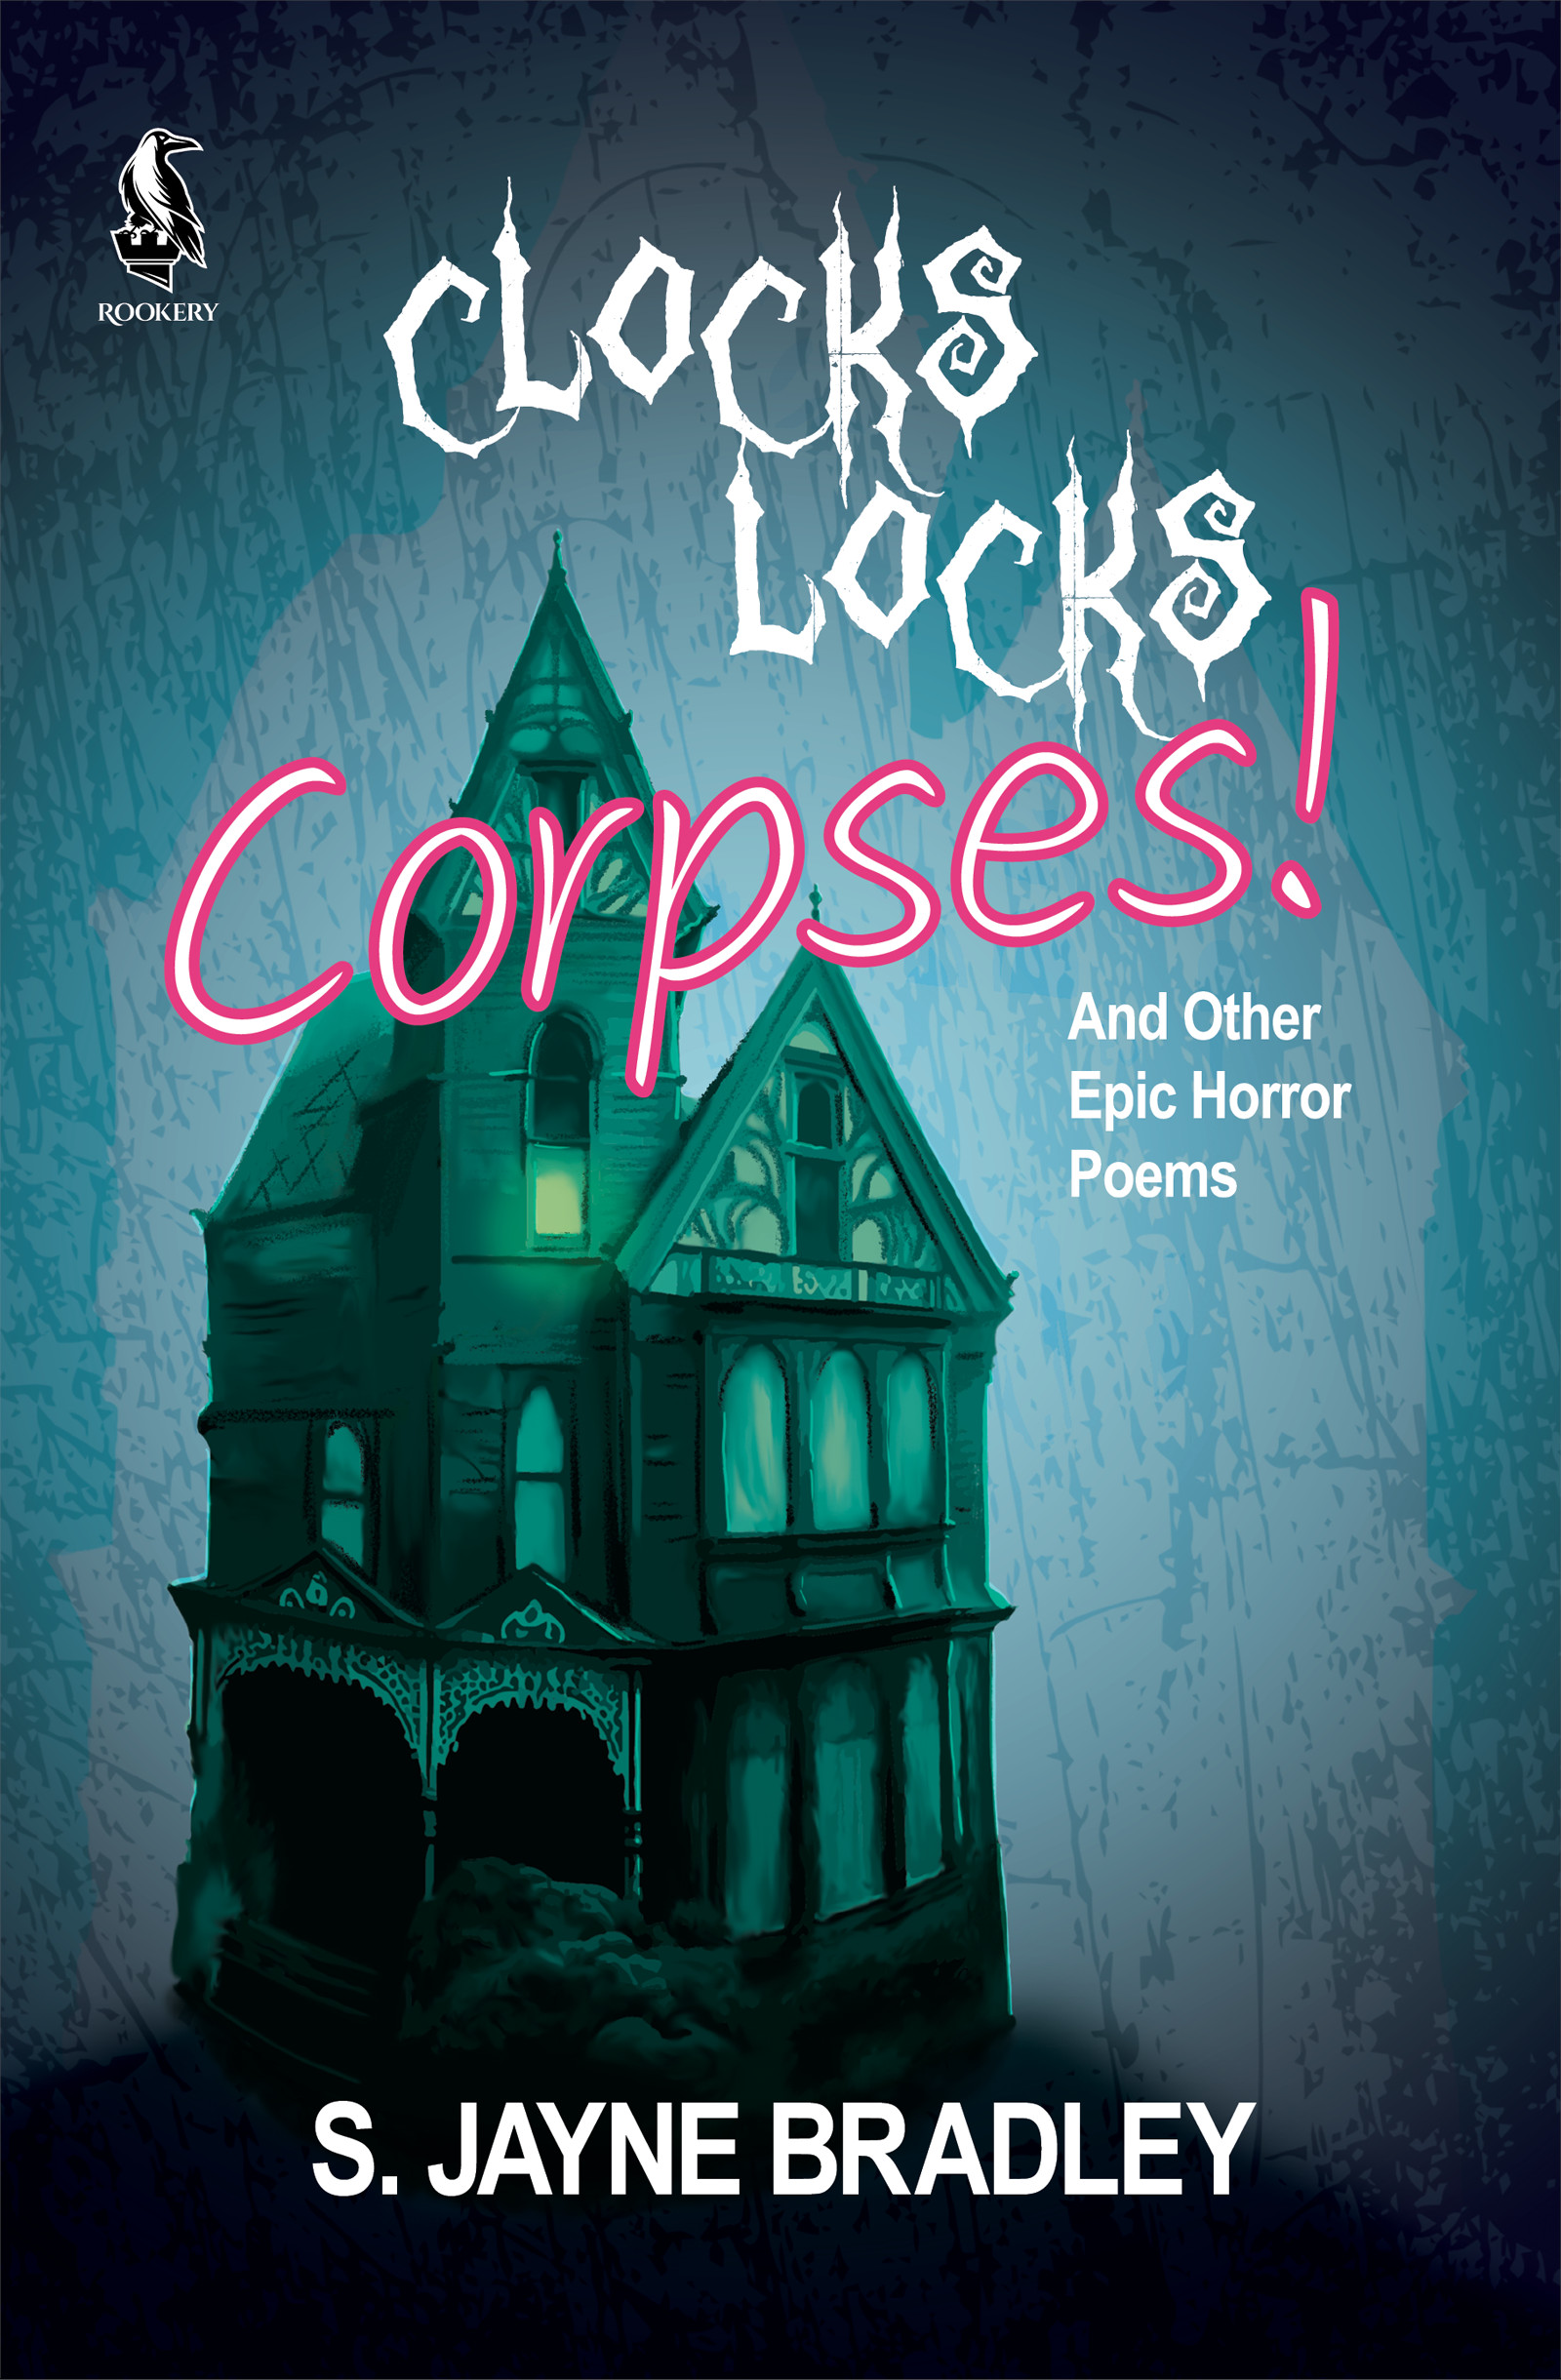 Clocks Locks Corpses! And Other Epic Horror Poems